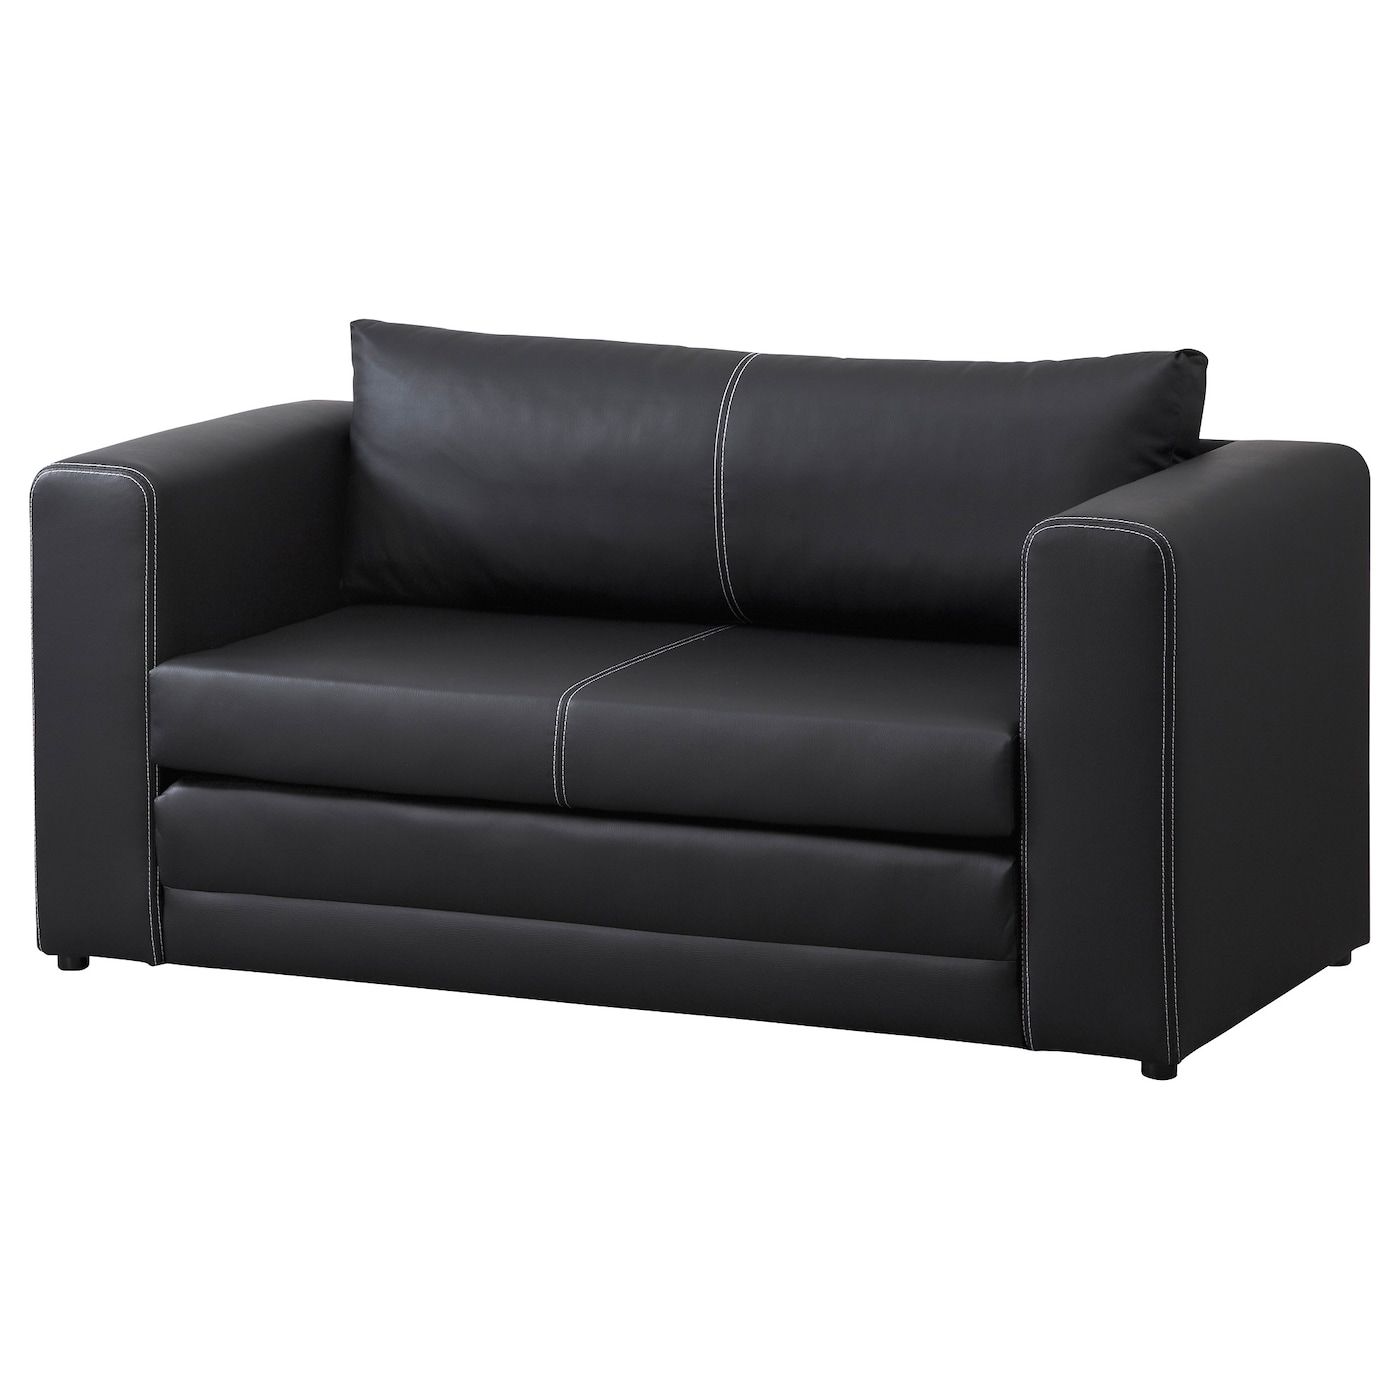 Askeby Black, Two Seat Sofa Bed – Ikea Pertaining To 2 Seater Black Velvet Sofa Beds (Gallery 9 of 20)